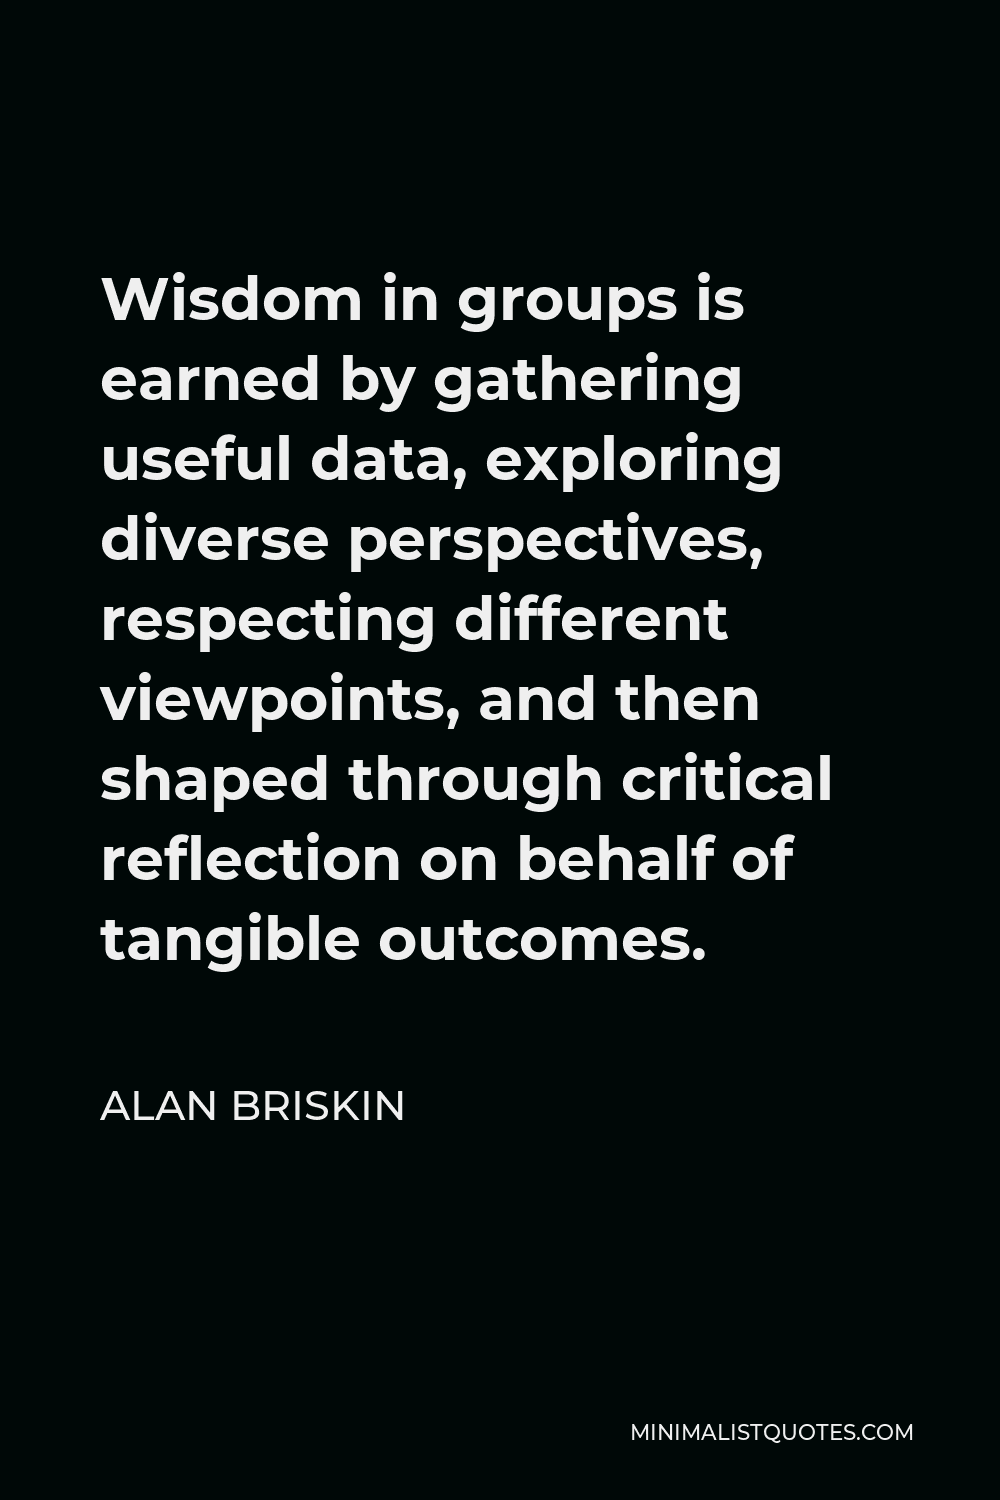 Alan Briskin Quote - Wisdom in groups is earned by gathering useful data, exploring diverse perspectives, respecting different viewpoints, and then shaped through critical reflection on behalf of tangible outcomes.